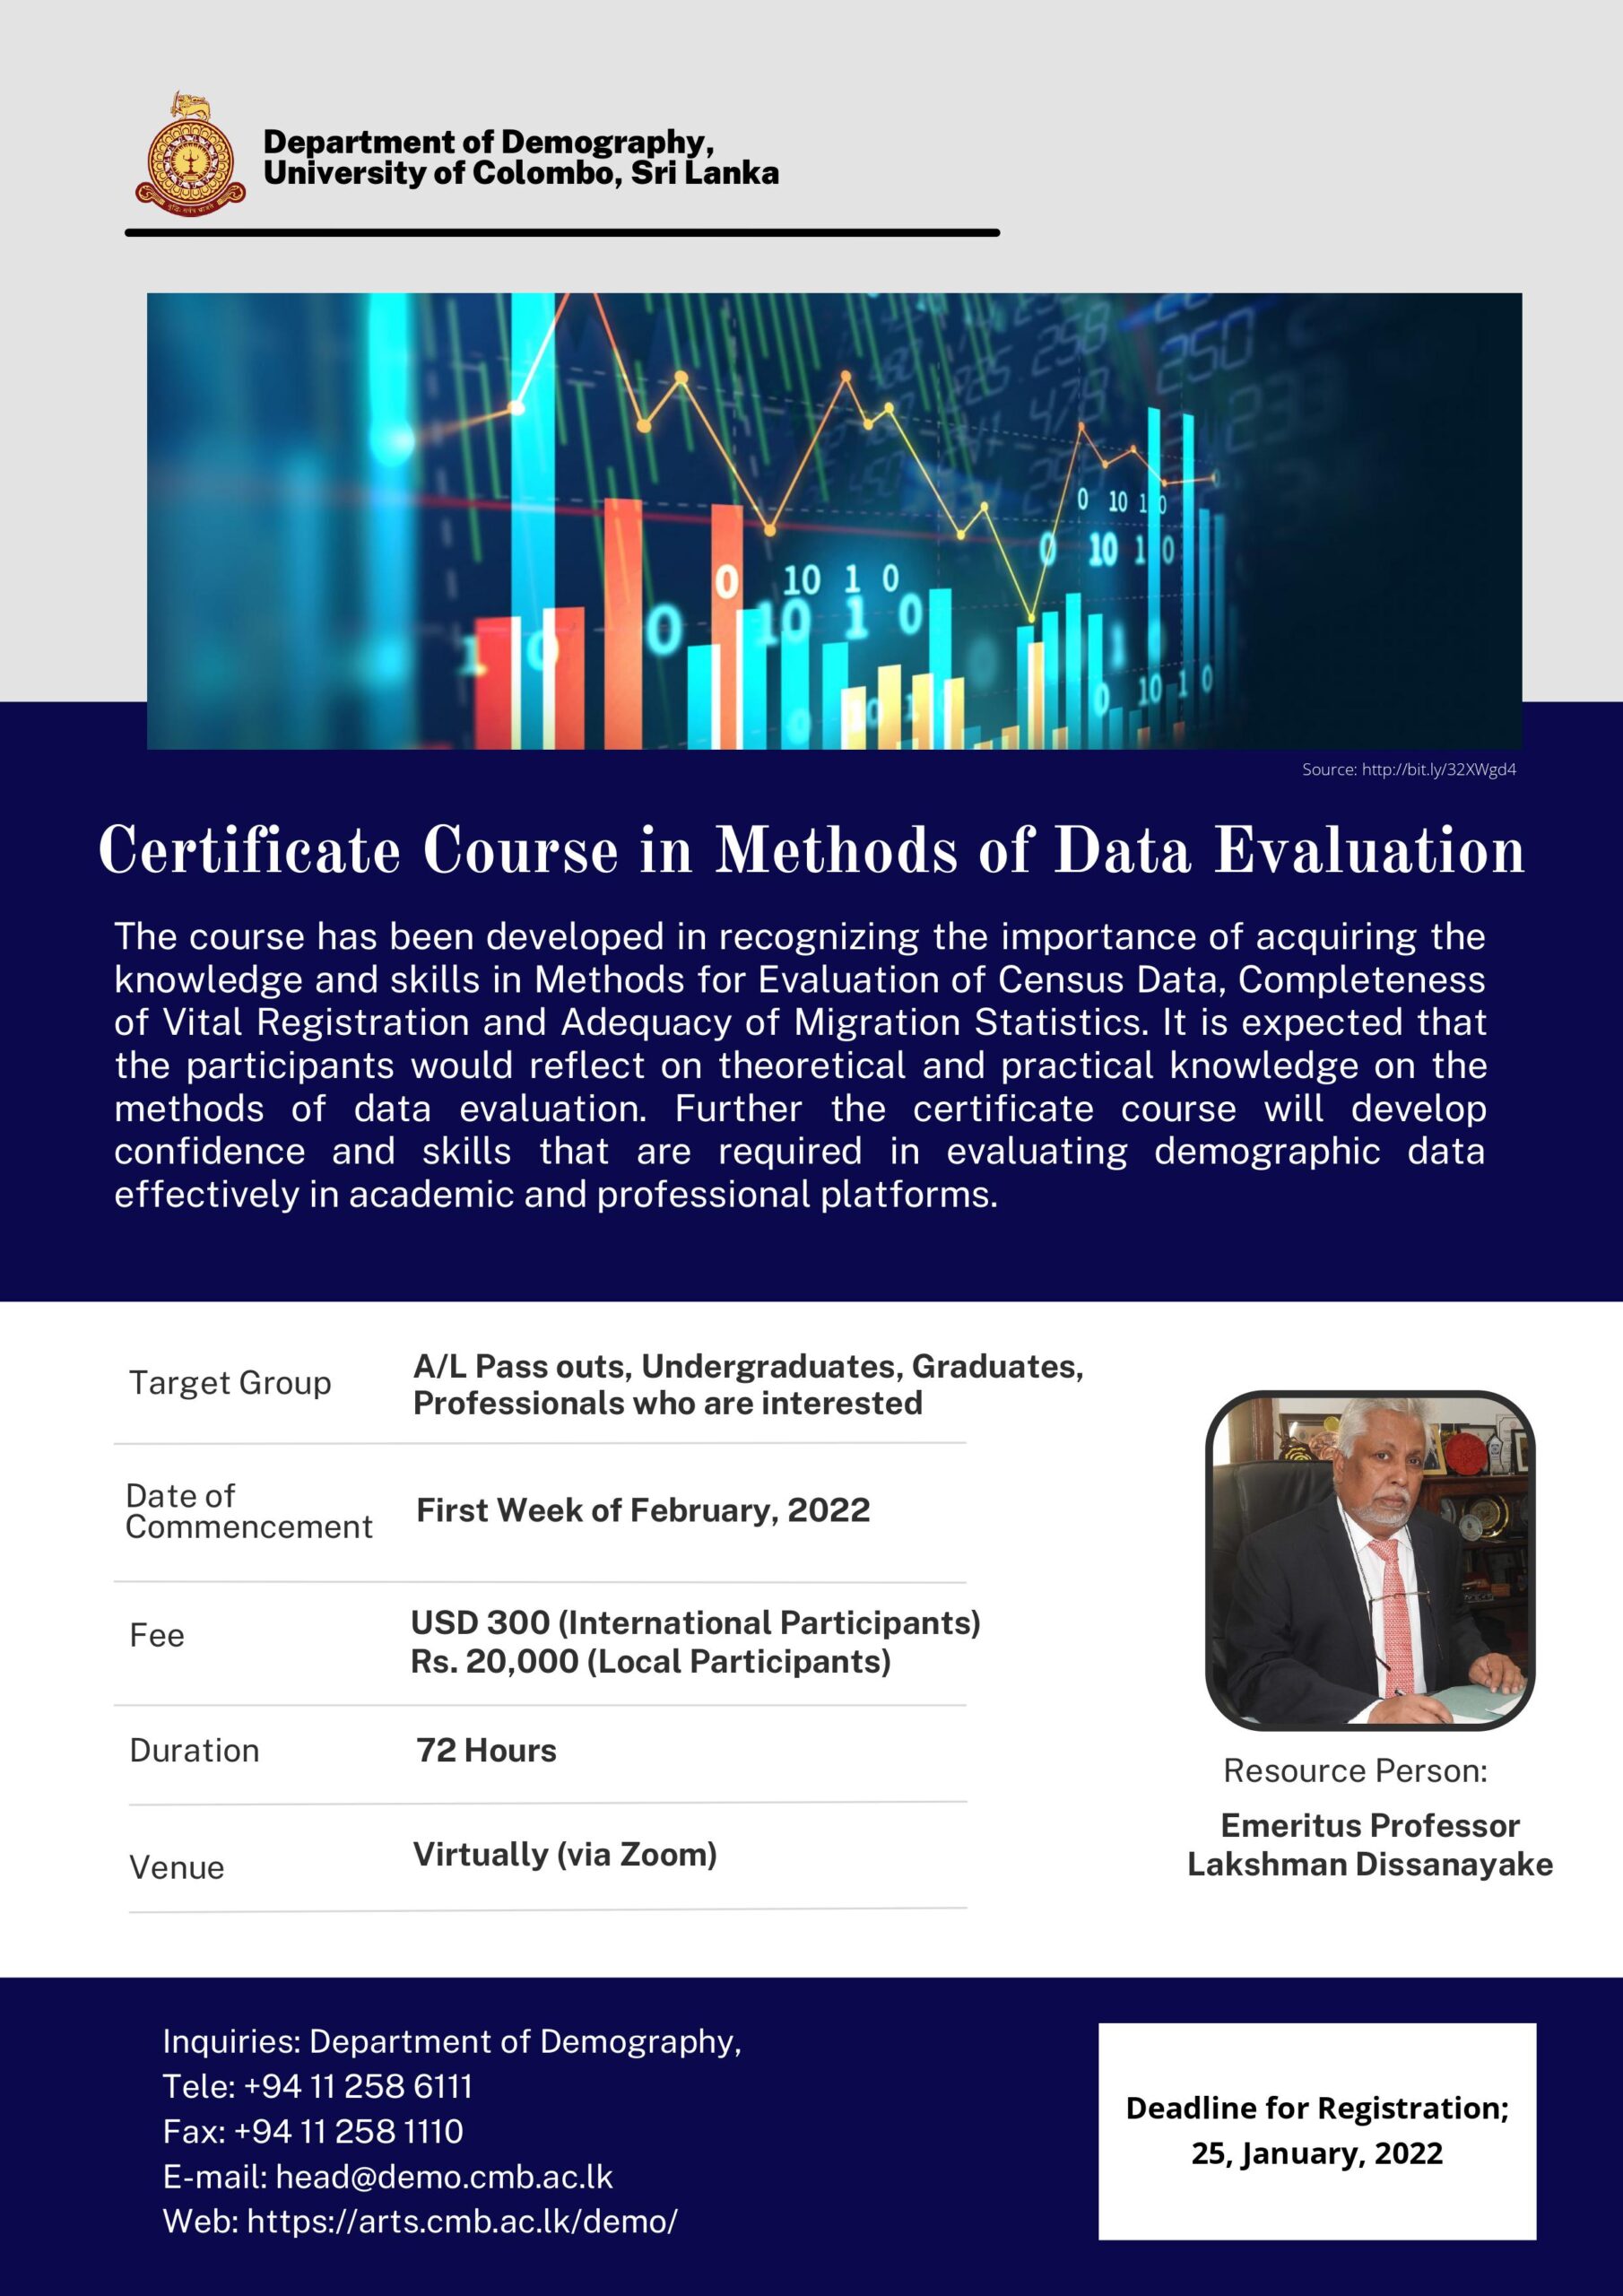 Certificate Course in Methods of Data Evaluation